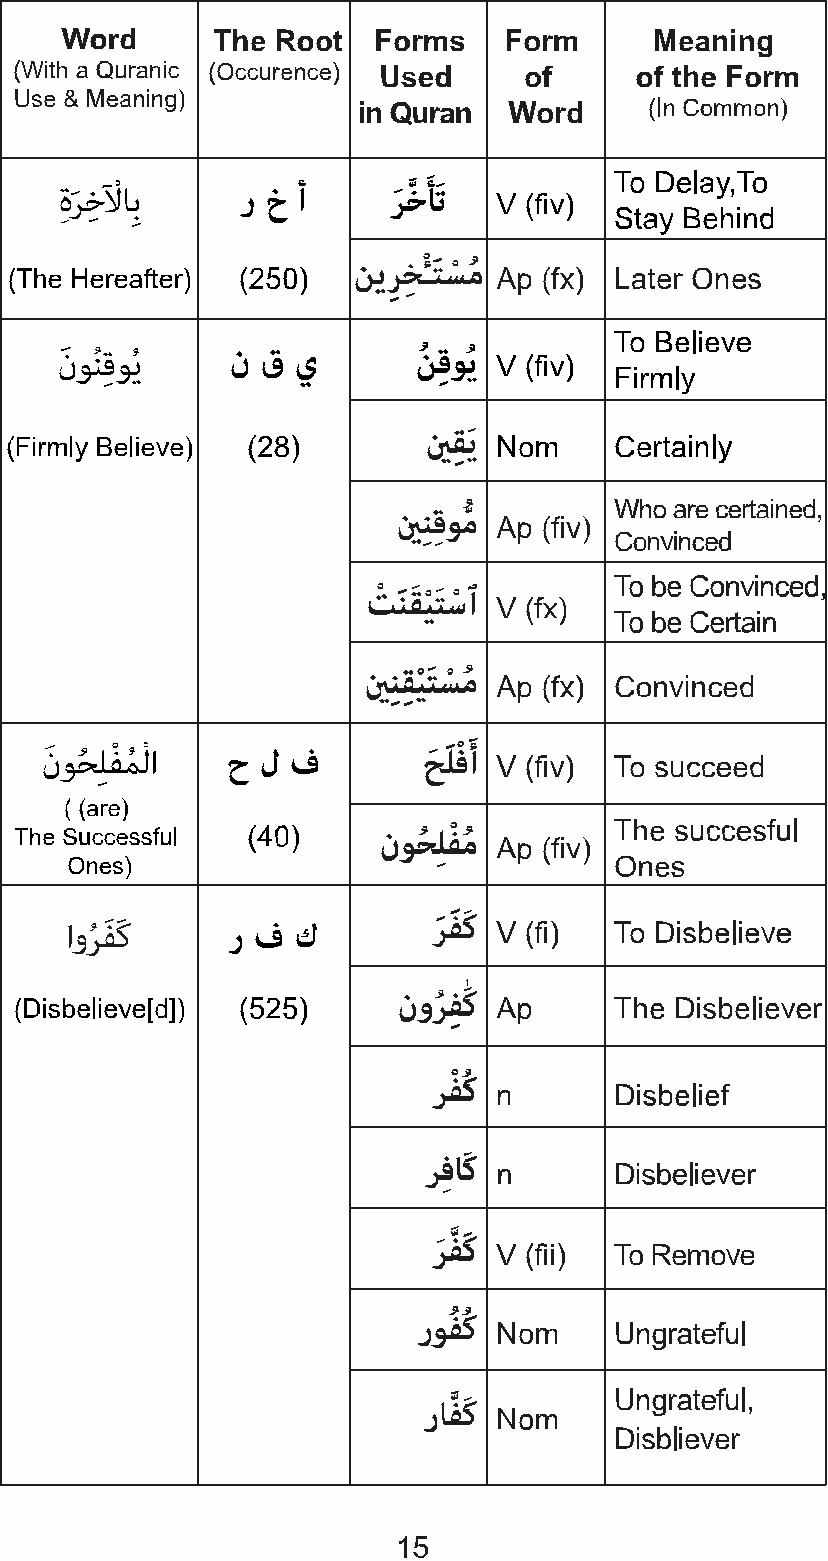 The Golden Words Dictionary of the Holy Quran - The Root Words and Their Forms - photo 17